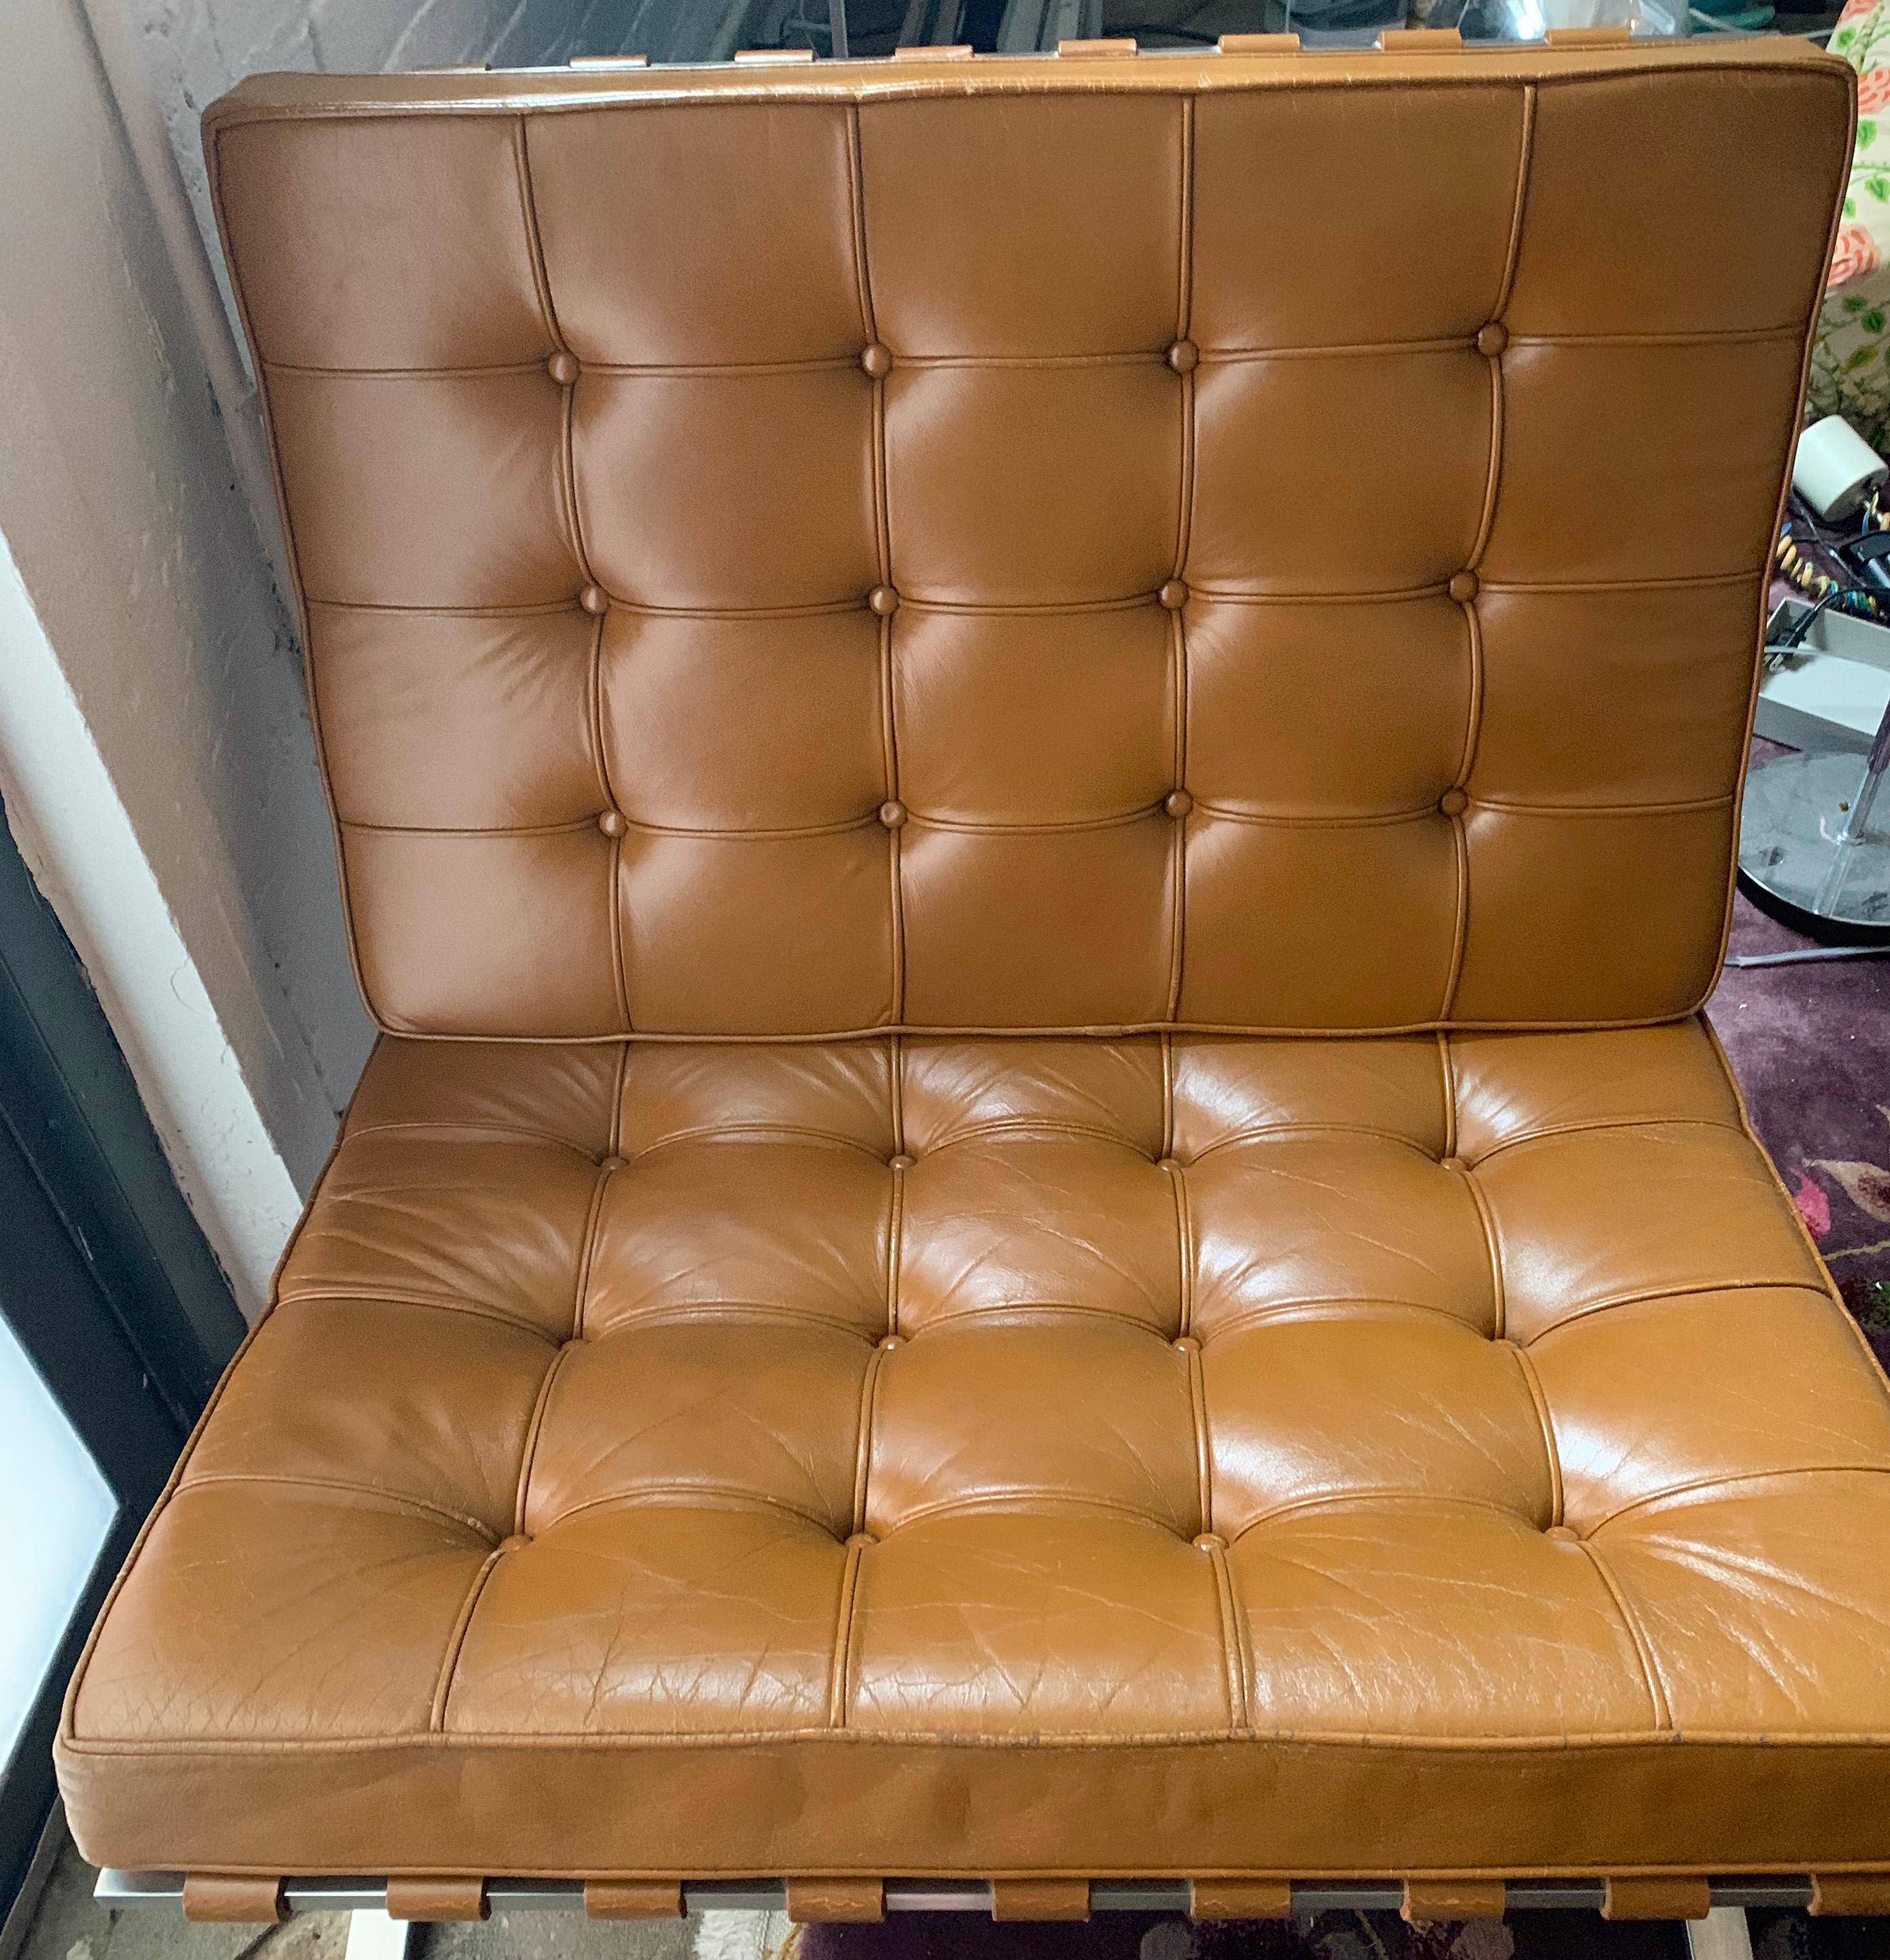 Knoll Barcelona lounge chair, stainless steel, Mies van der Rohe, circa 1961. Deep chestnut brown original leather, straps in-tact, highly sought after original stainless steel frame. Label intact on one chair - see photos. Knoll Park Ave address on